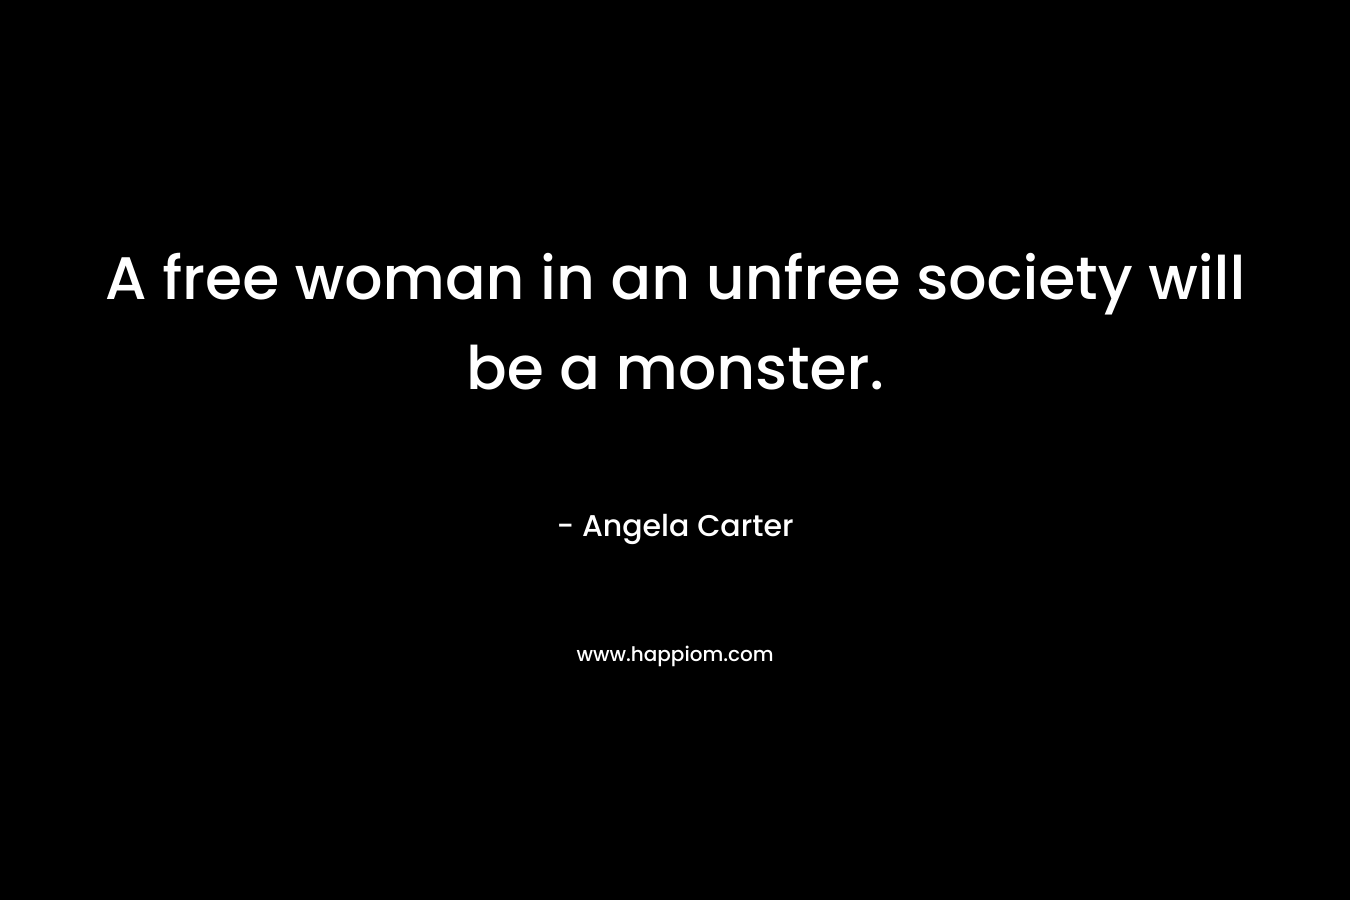 A free woman in an unfree society will be a monster.